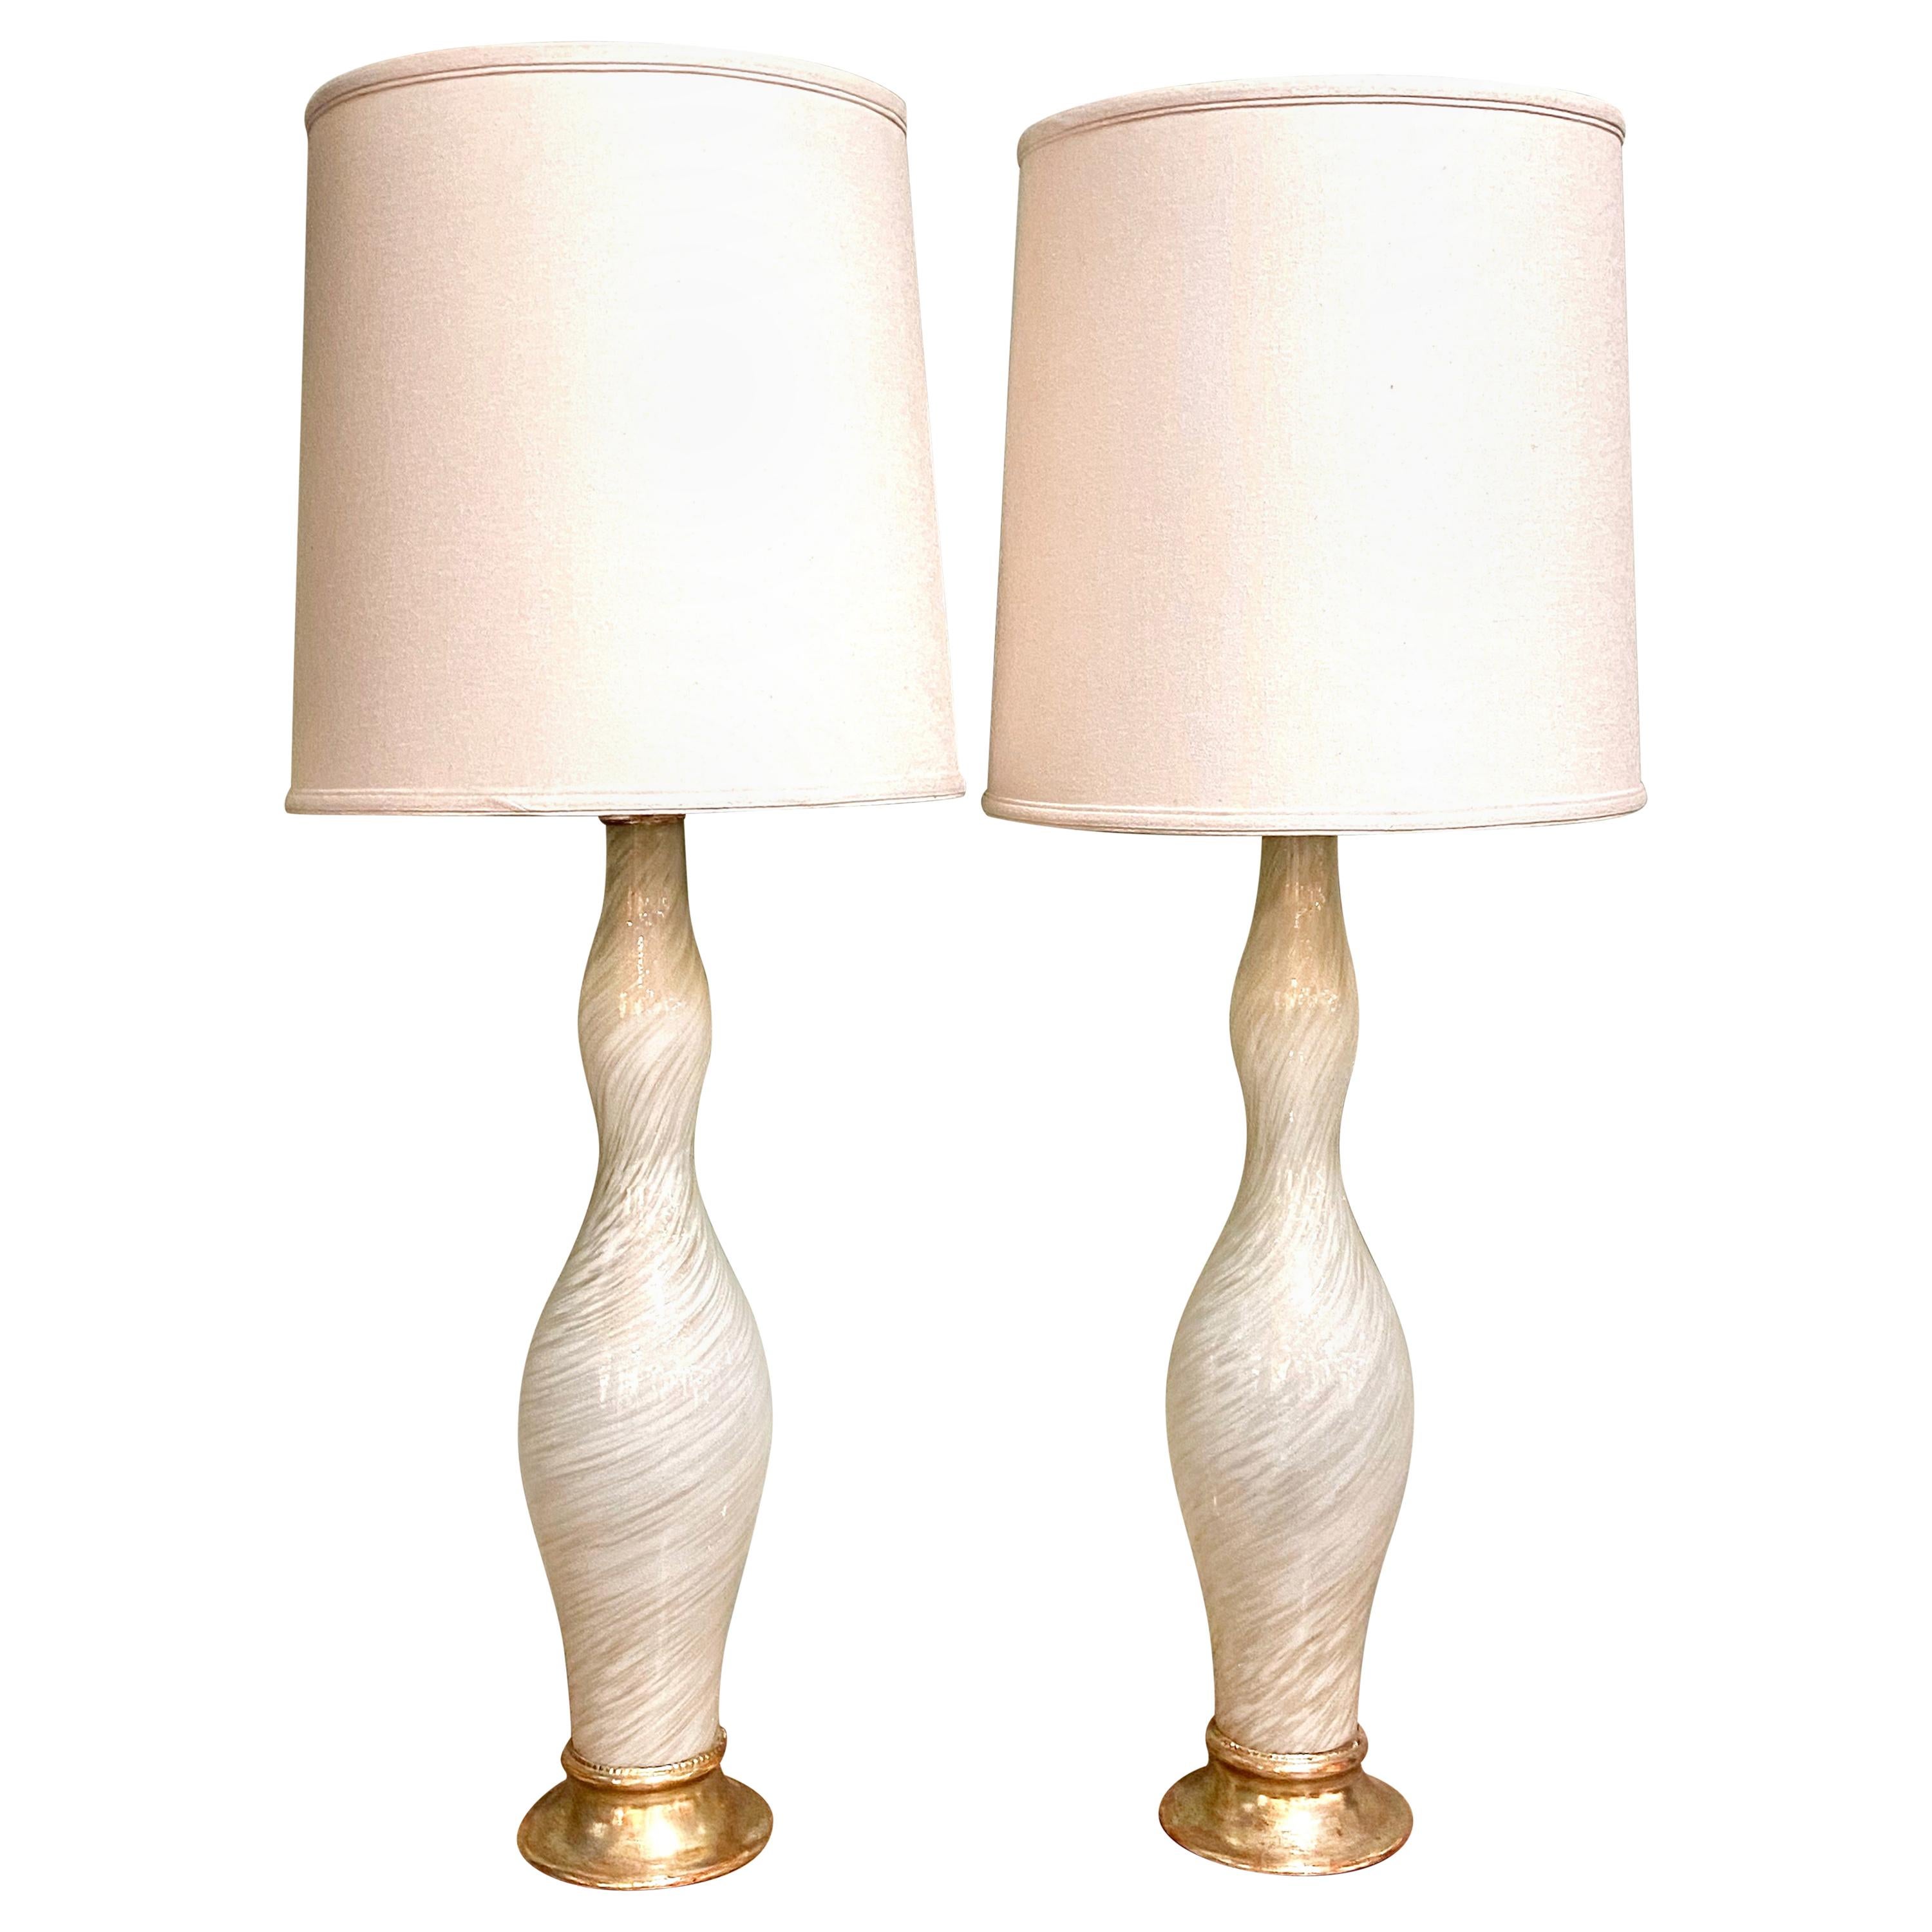 Lamps Vintage Tall Pair White Ceramic Gold Leaves Mid Century Hollywood Regency 20 Inches